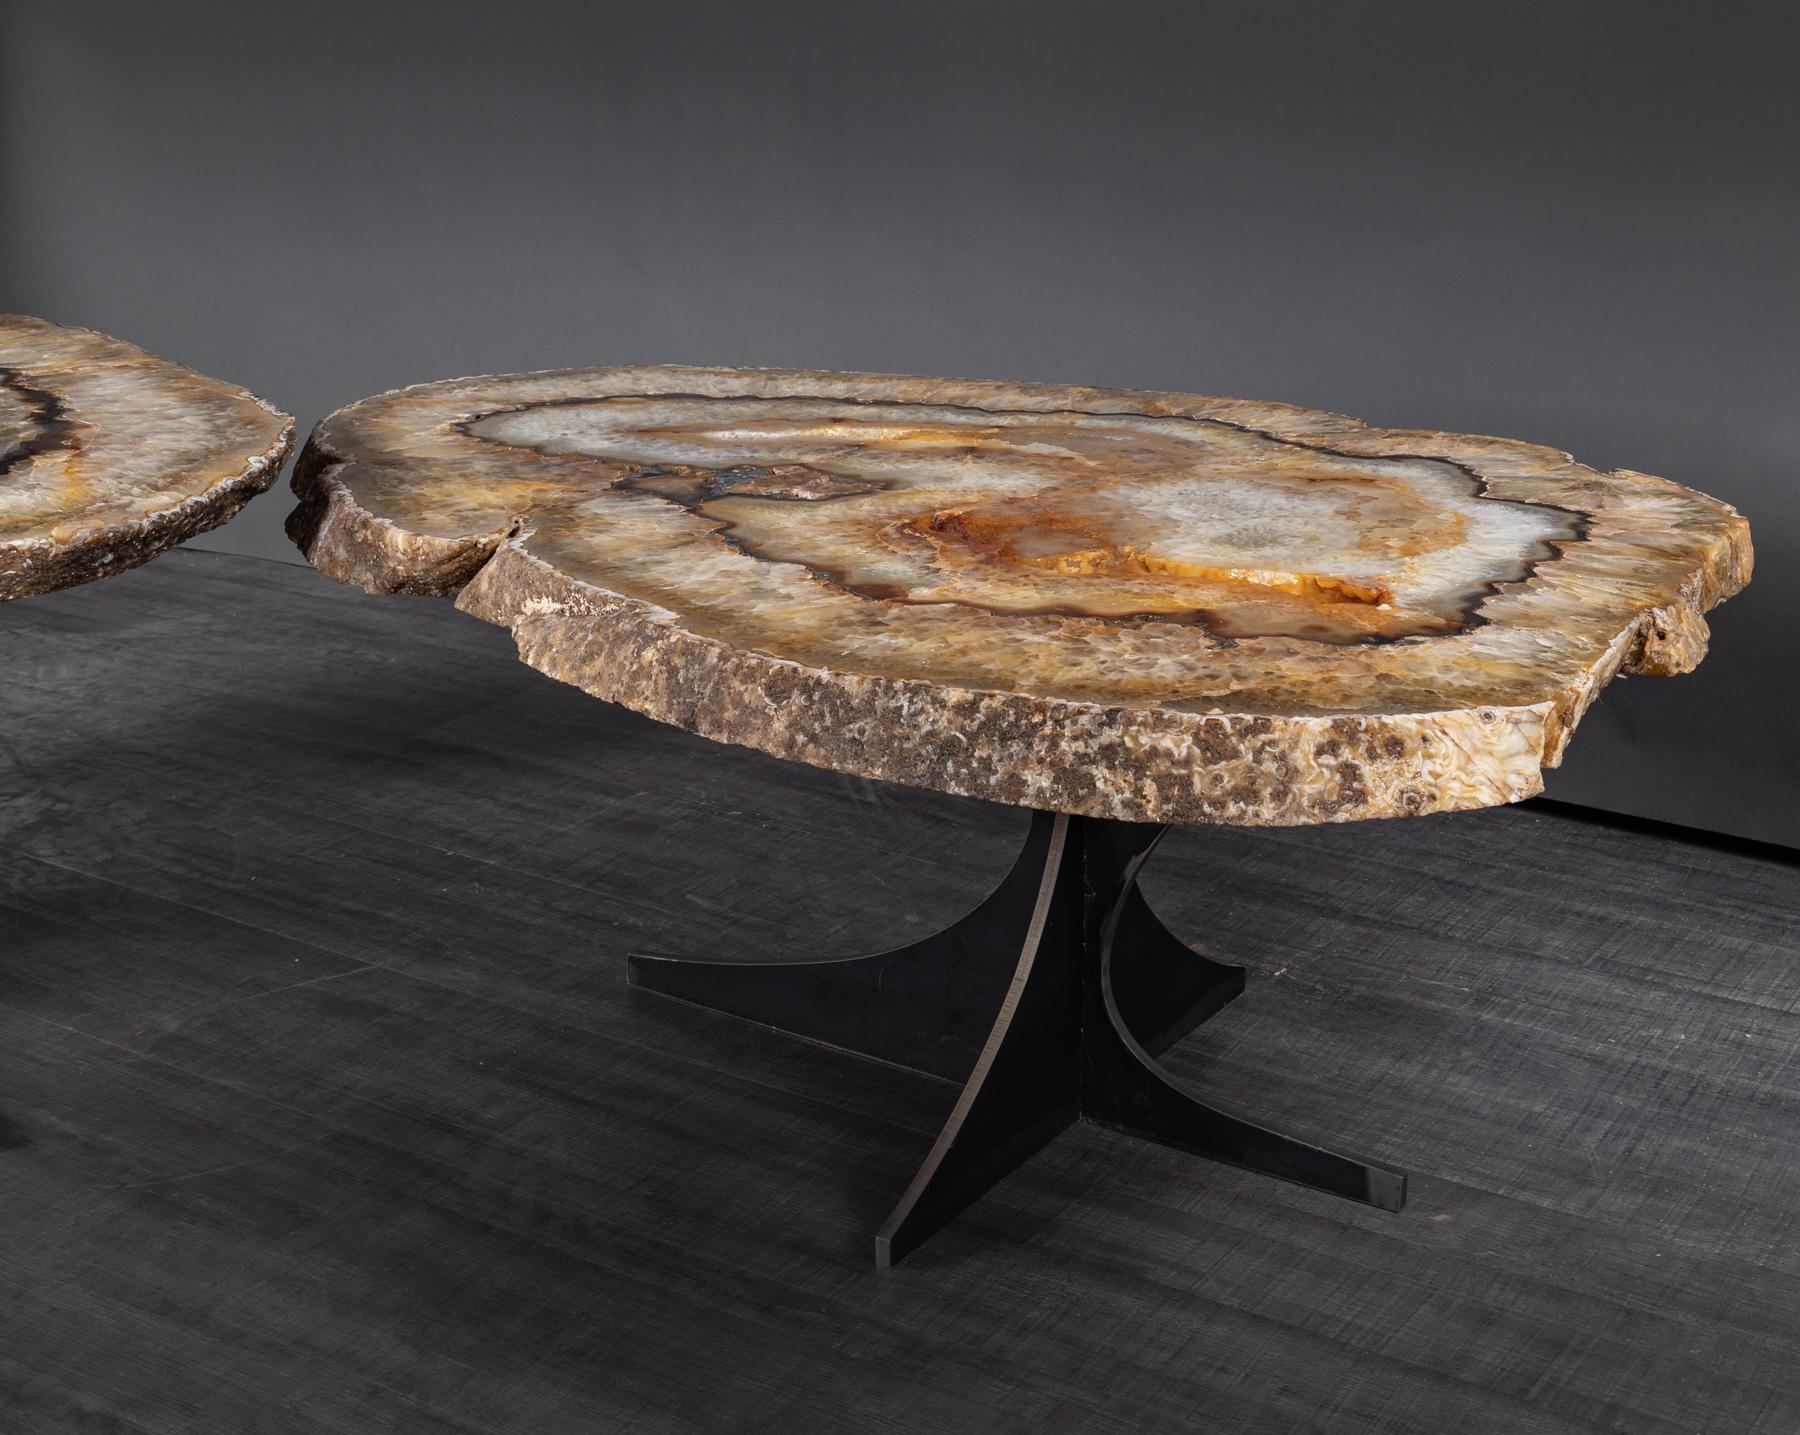 Mexican Center Table or Coffee Table, Pair of Brazilian Agate with Gold Color Metal Base